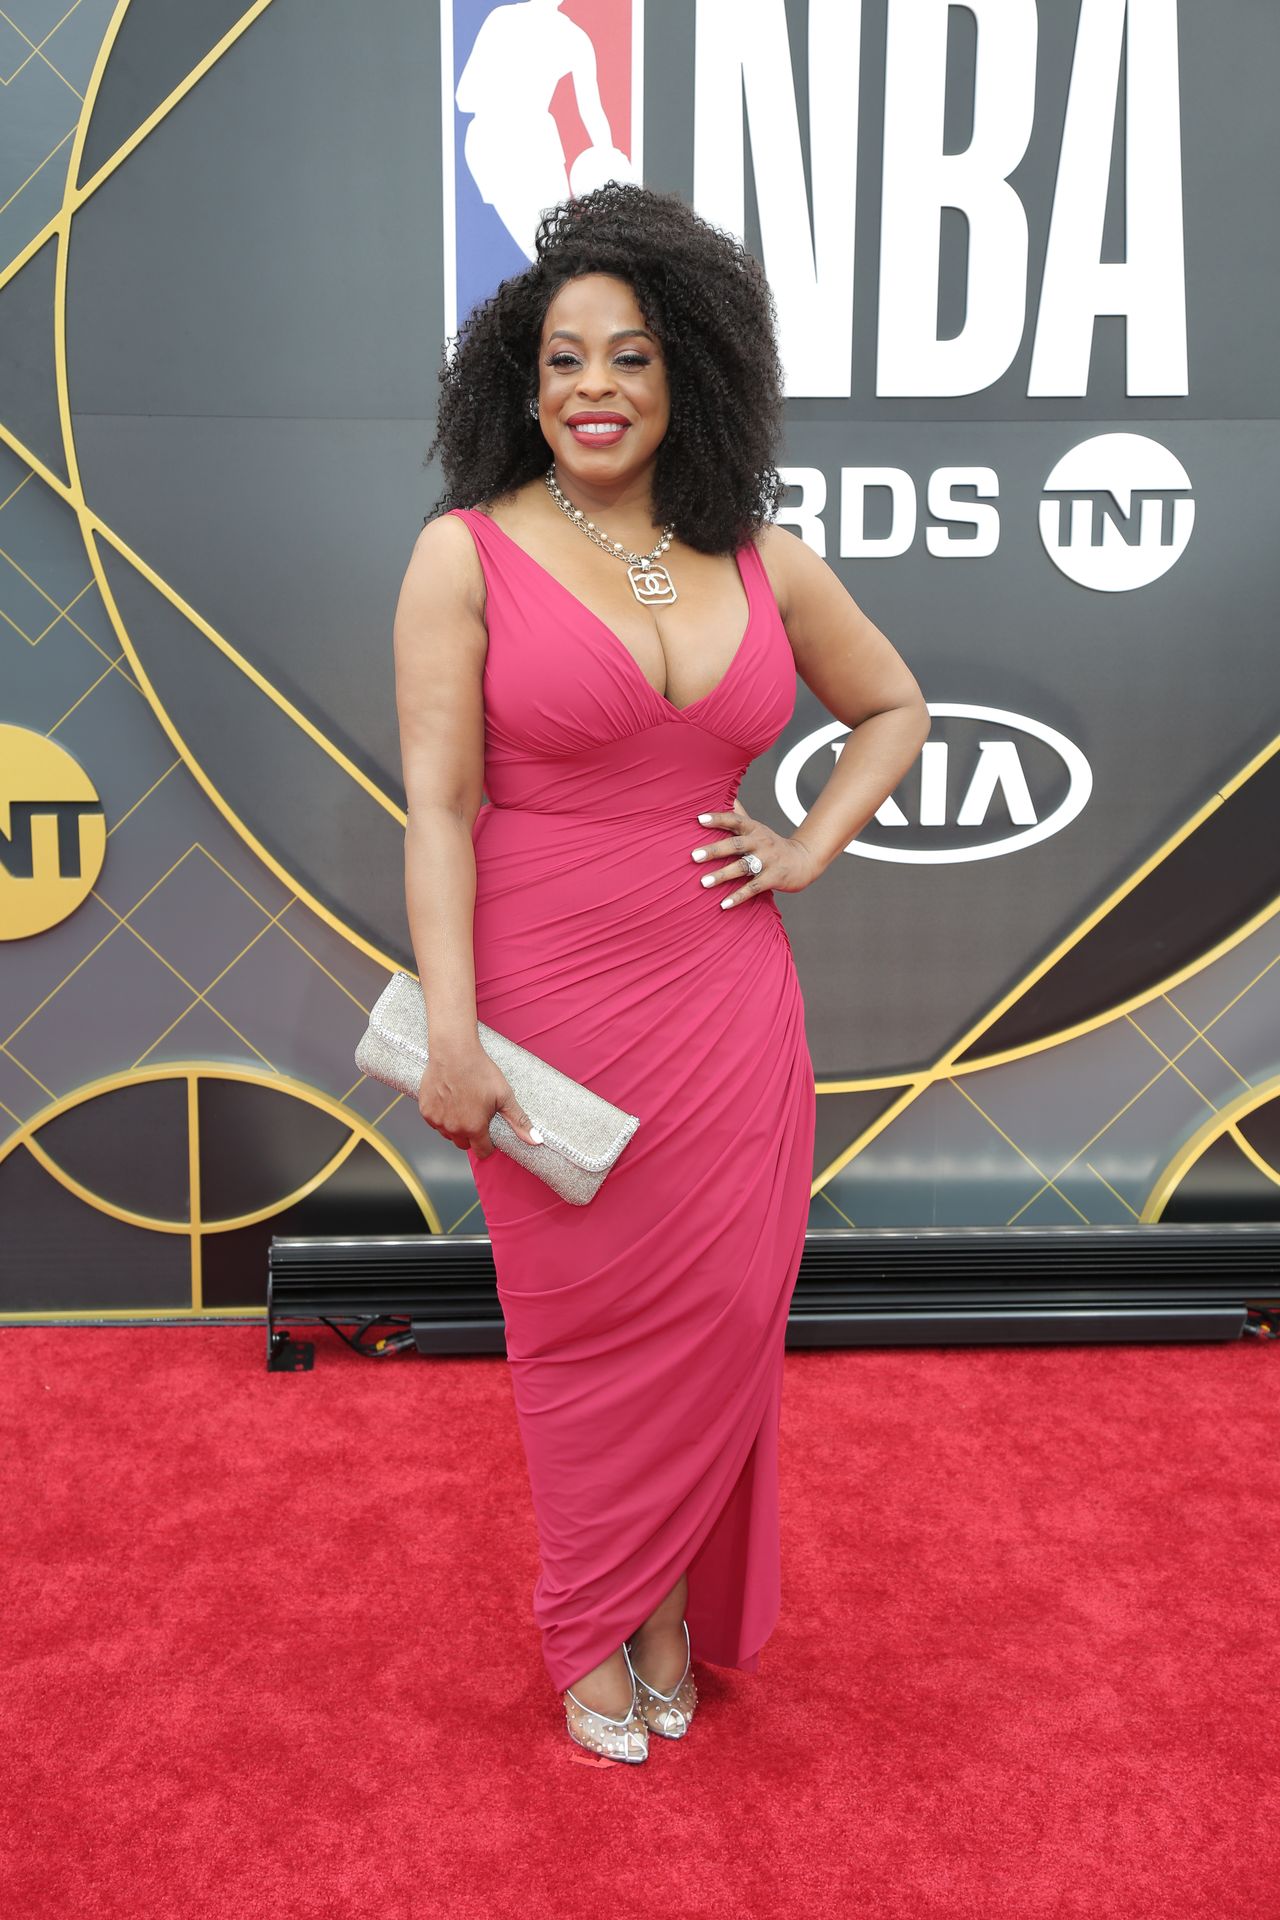 Niecy nash nude pictures